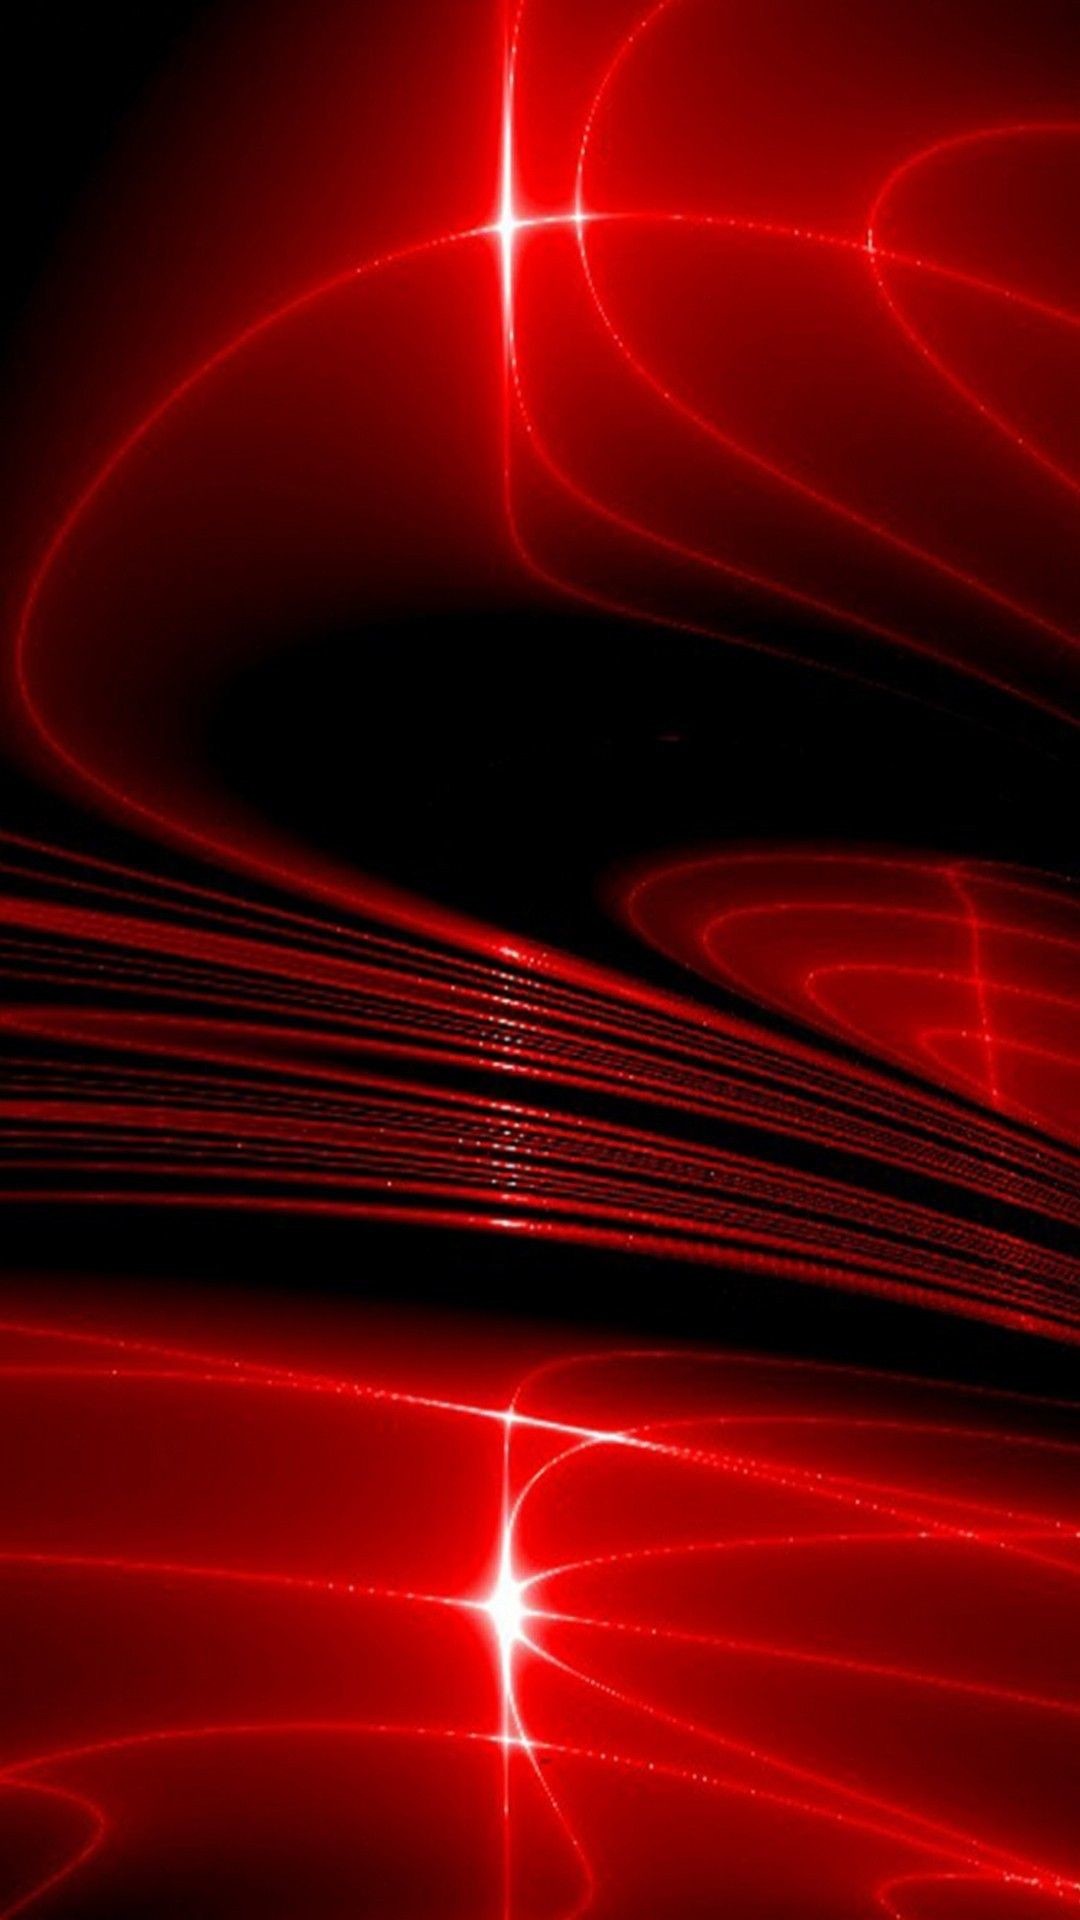 Cool Abstract Hd Wallpapers For Mobile - Best Wallpaper Hd For Mobile - HD Wallpaper 